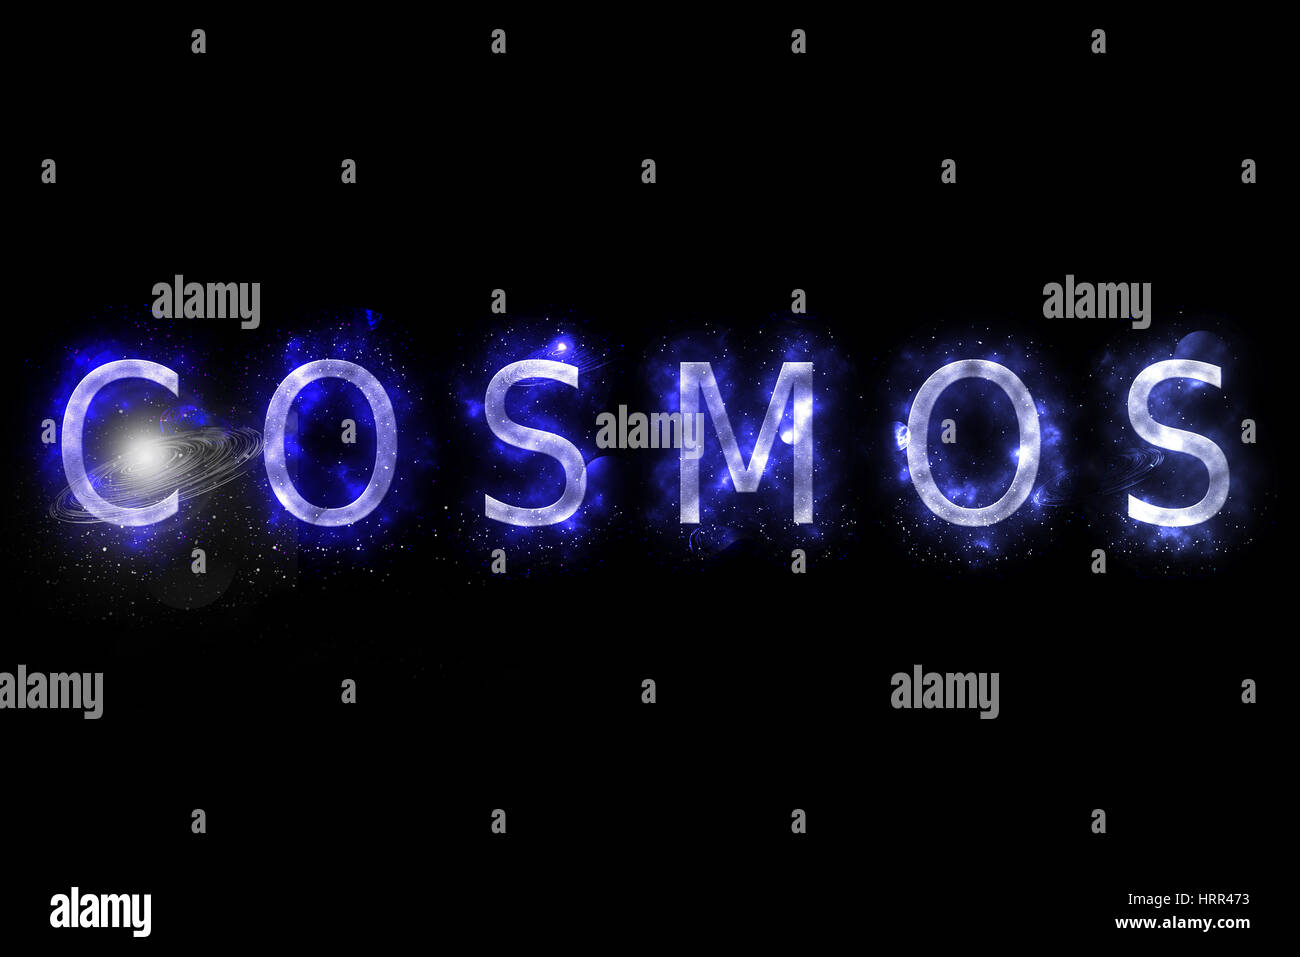 Background with cosmos text efect Stock Photo